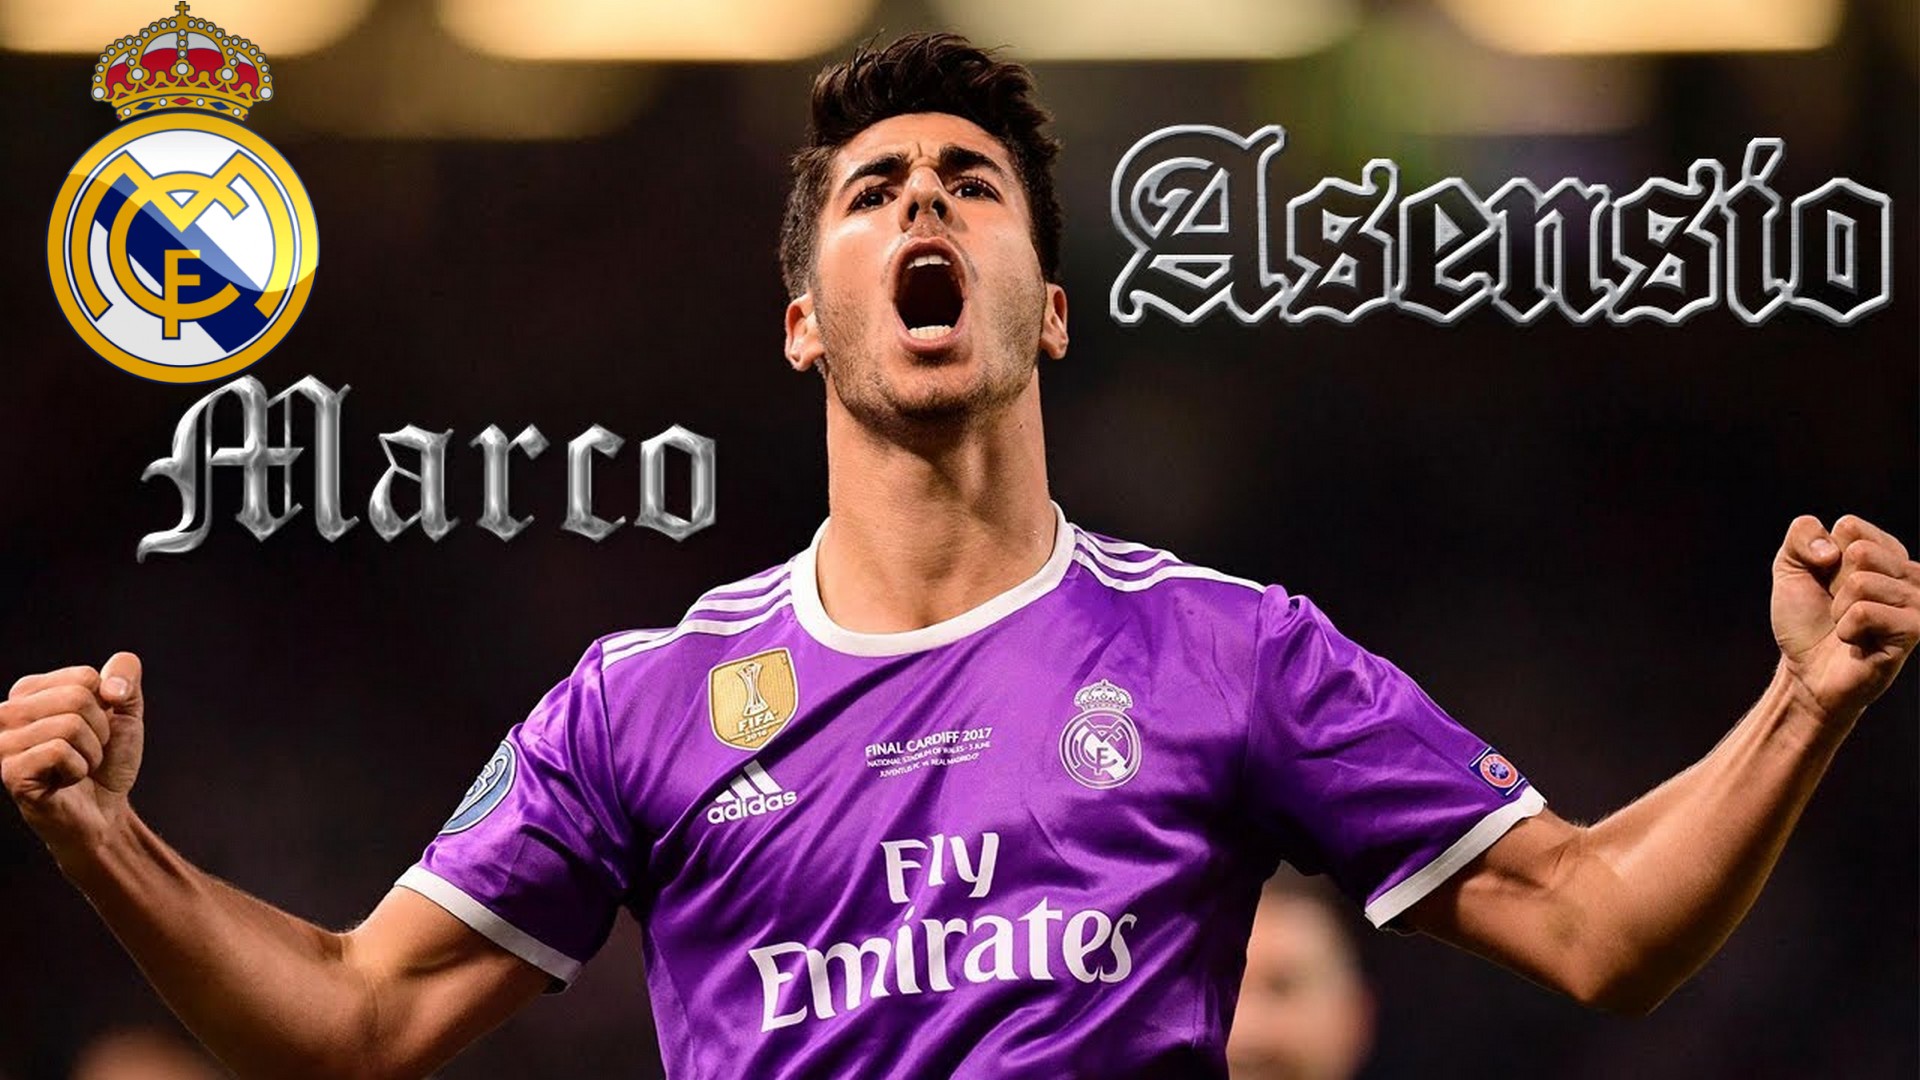 HD Marco Asensio Real Madrid Backgrounds with resolution 1920x1080 pixel. You can make this wallpaper for your Mac or Windows Desktop Background, iPhone, Android or Tablet and another Smartphone device